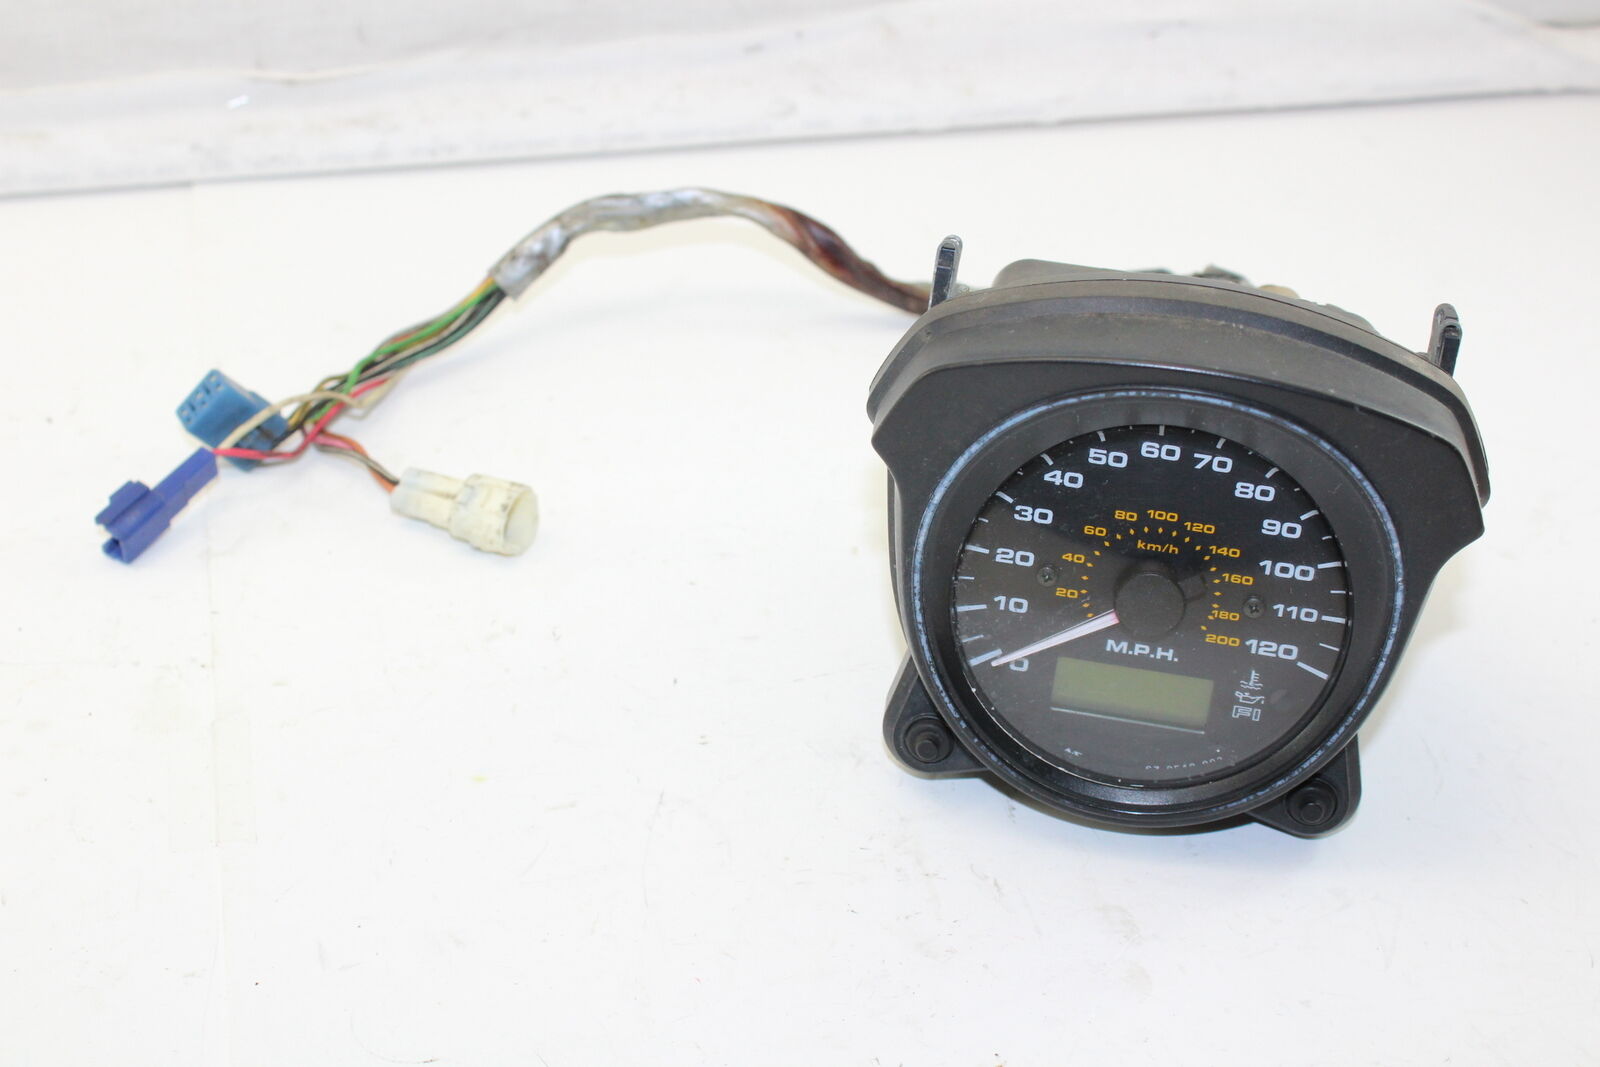 05-09 BOULEVARD VZ800 M50 SPEEDO TACH DISPLAY SP Free shipping anywhere in the Classic nation GAUGES CLUSTER